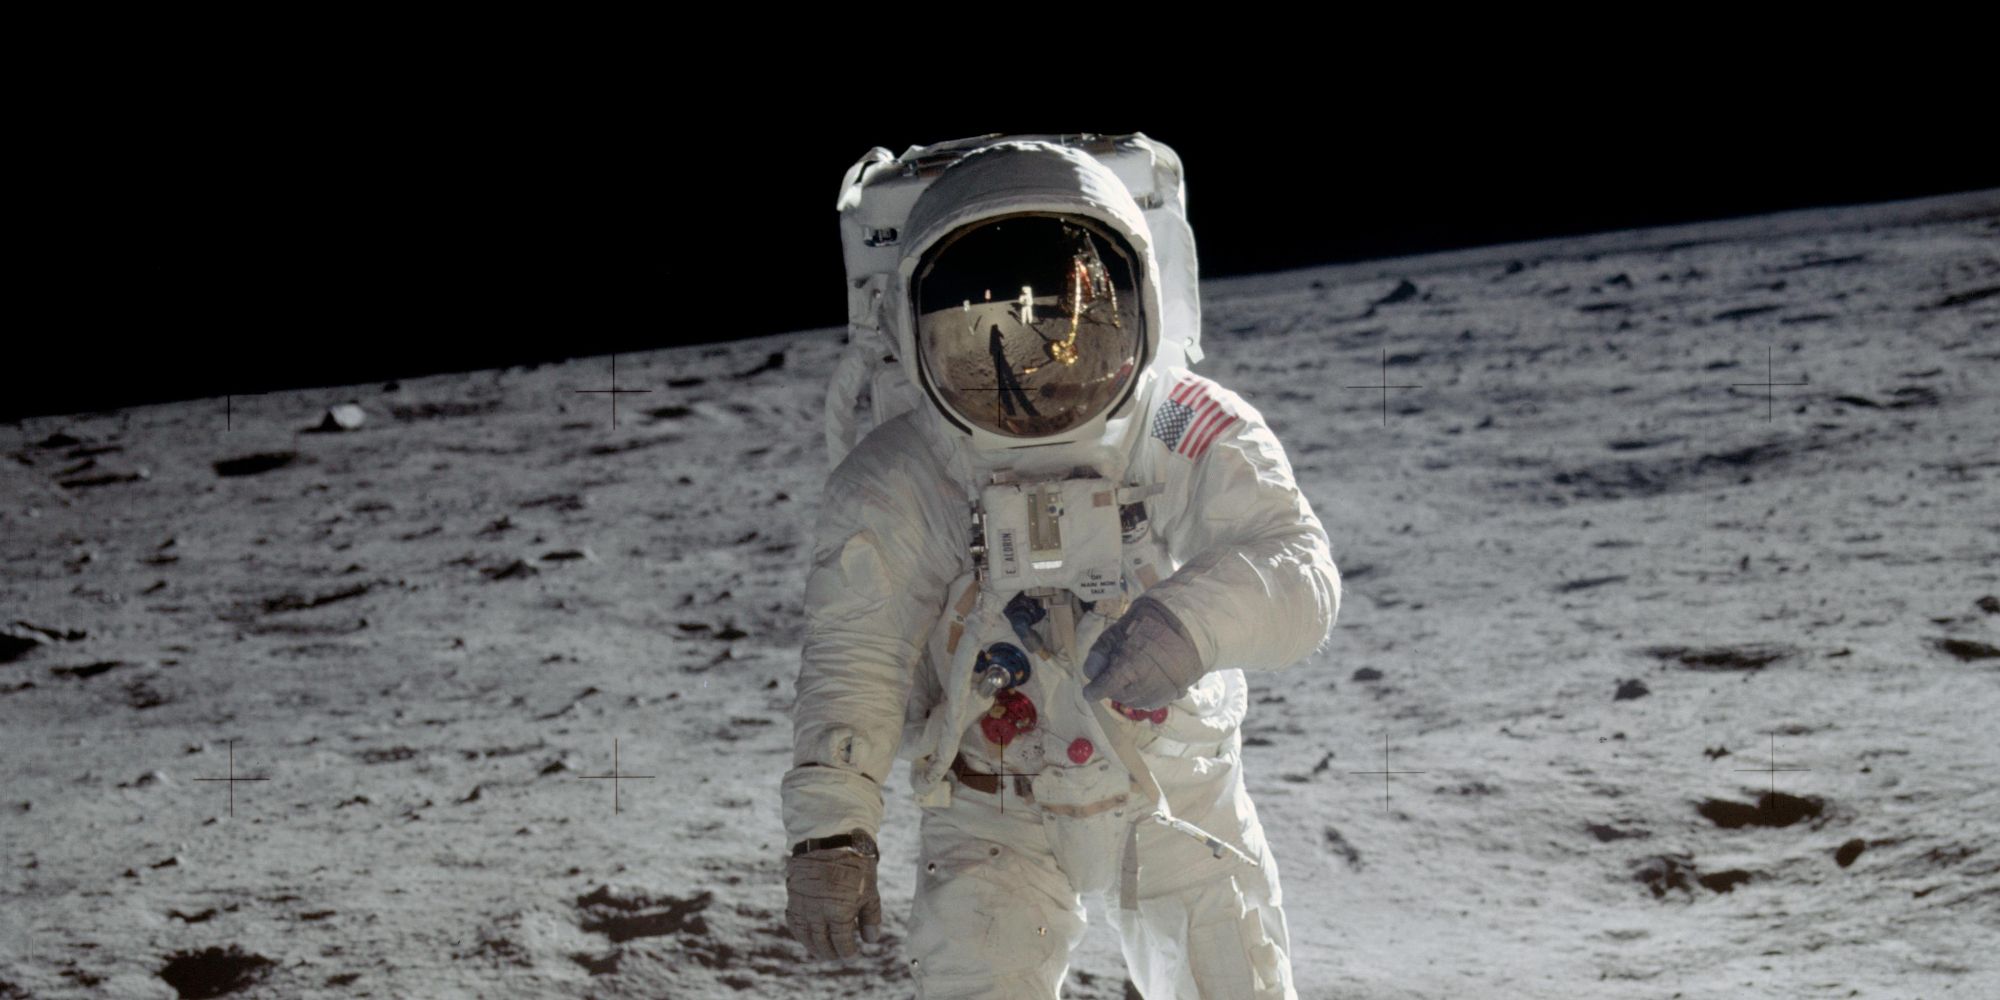 Photo of Buzz Aldrin from the 1969 moon landing